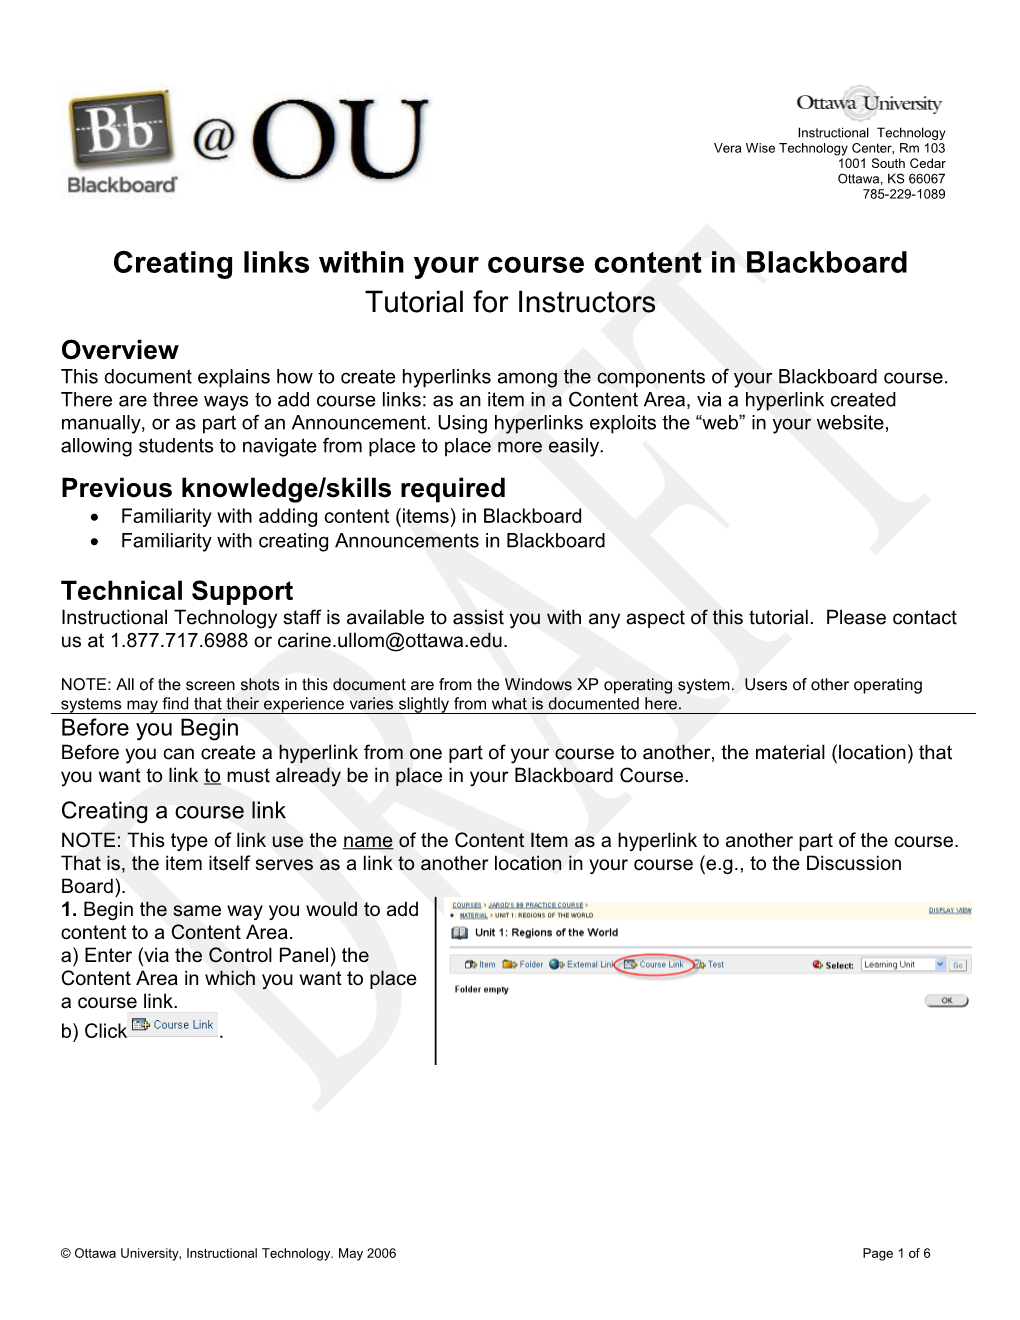 Creating Links Within Your Course Content in Blackboard